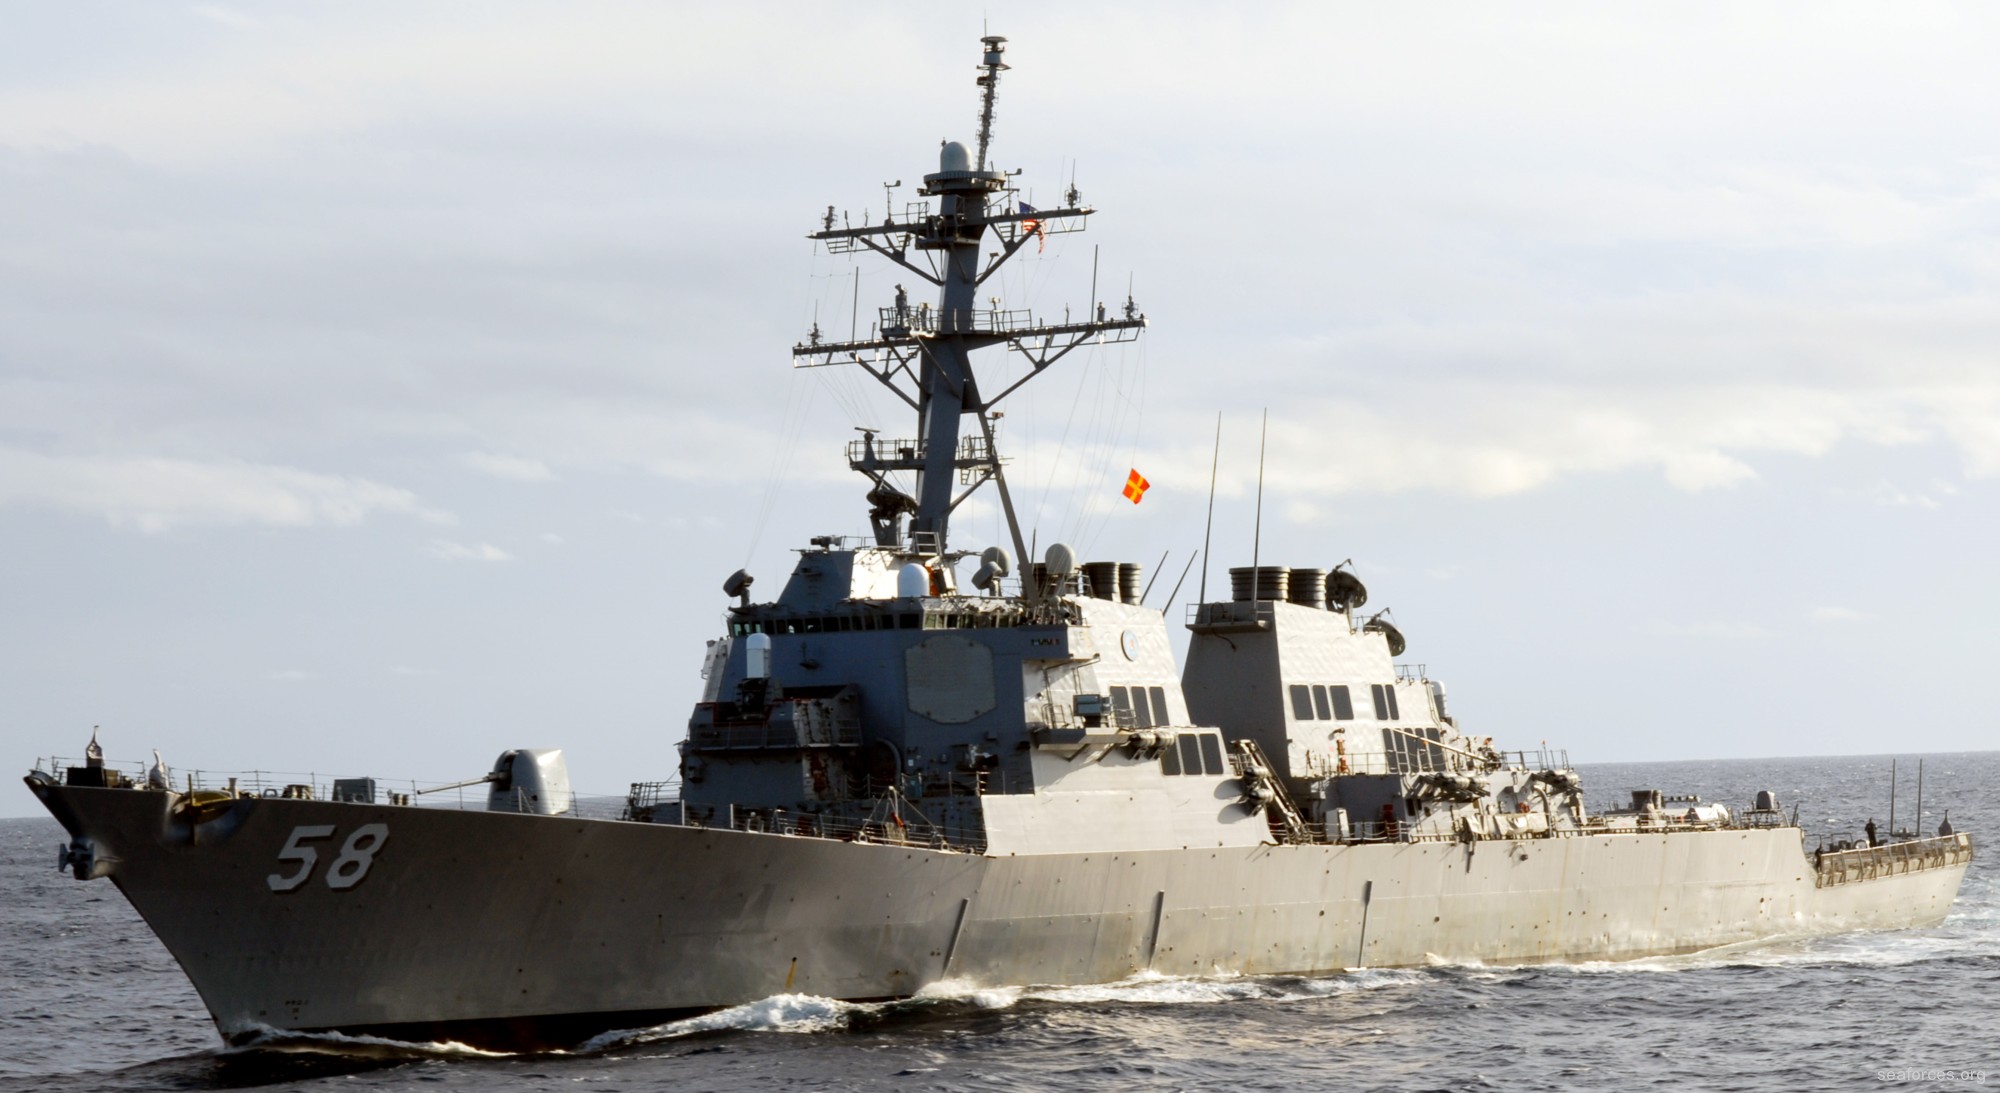 ddg-58 uss laboon guided missile destroyer us navy 68